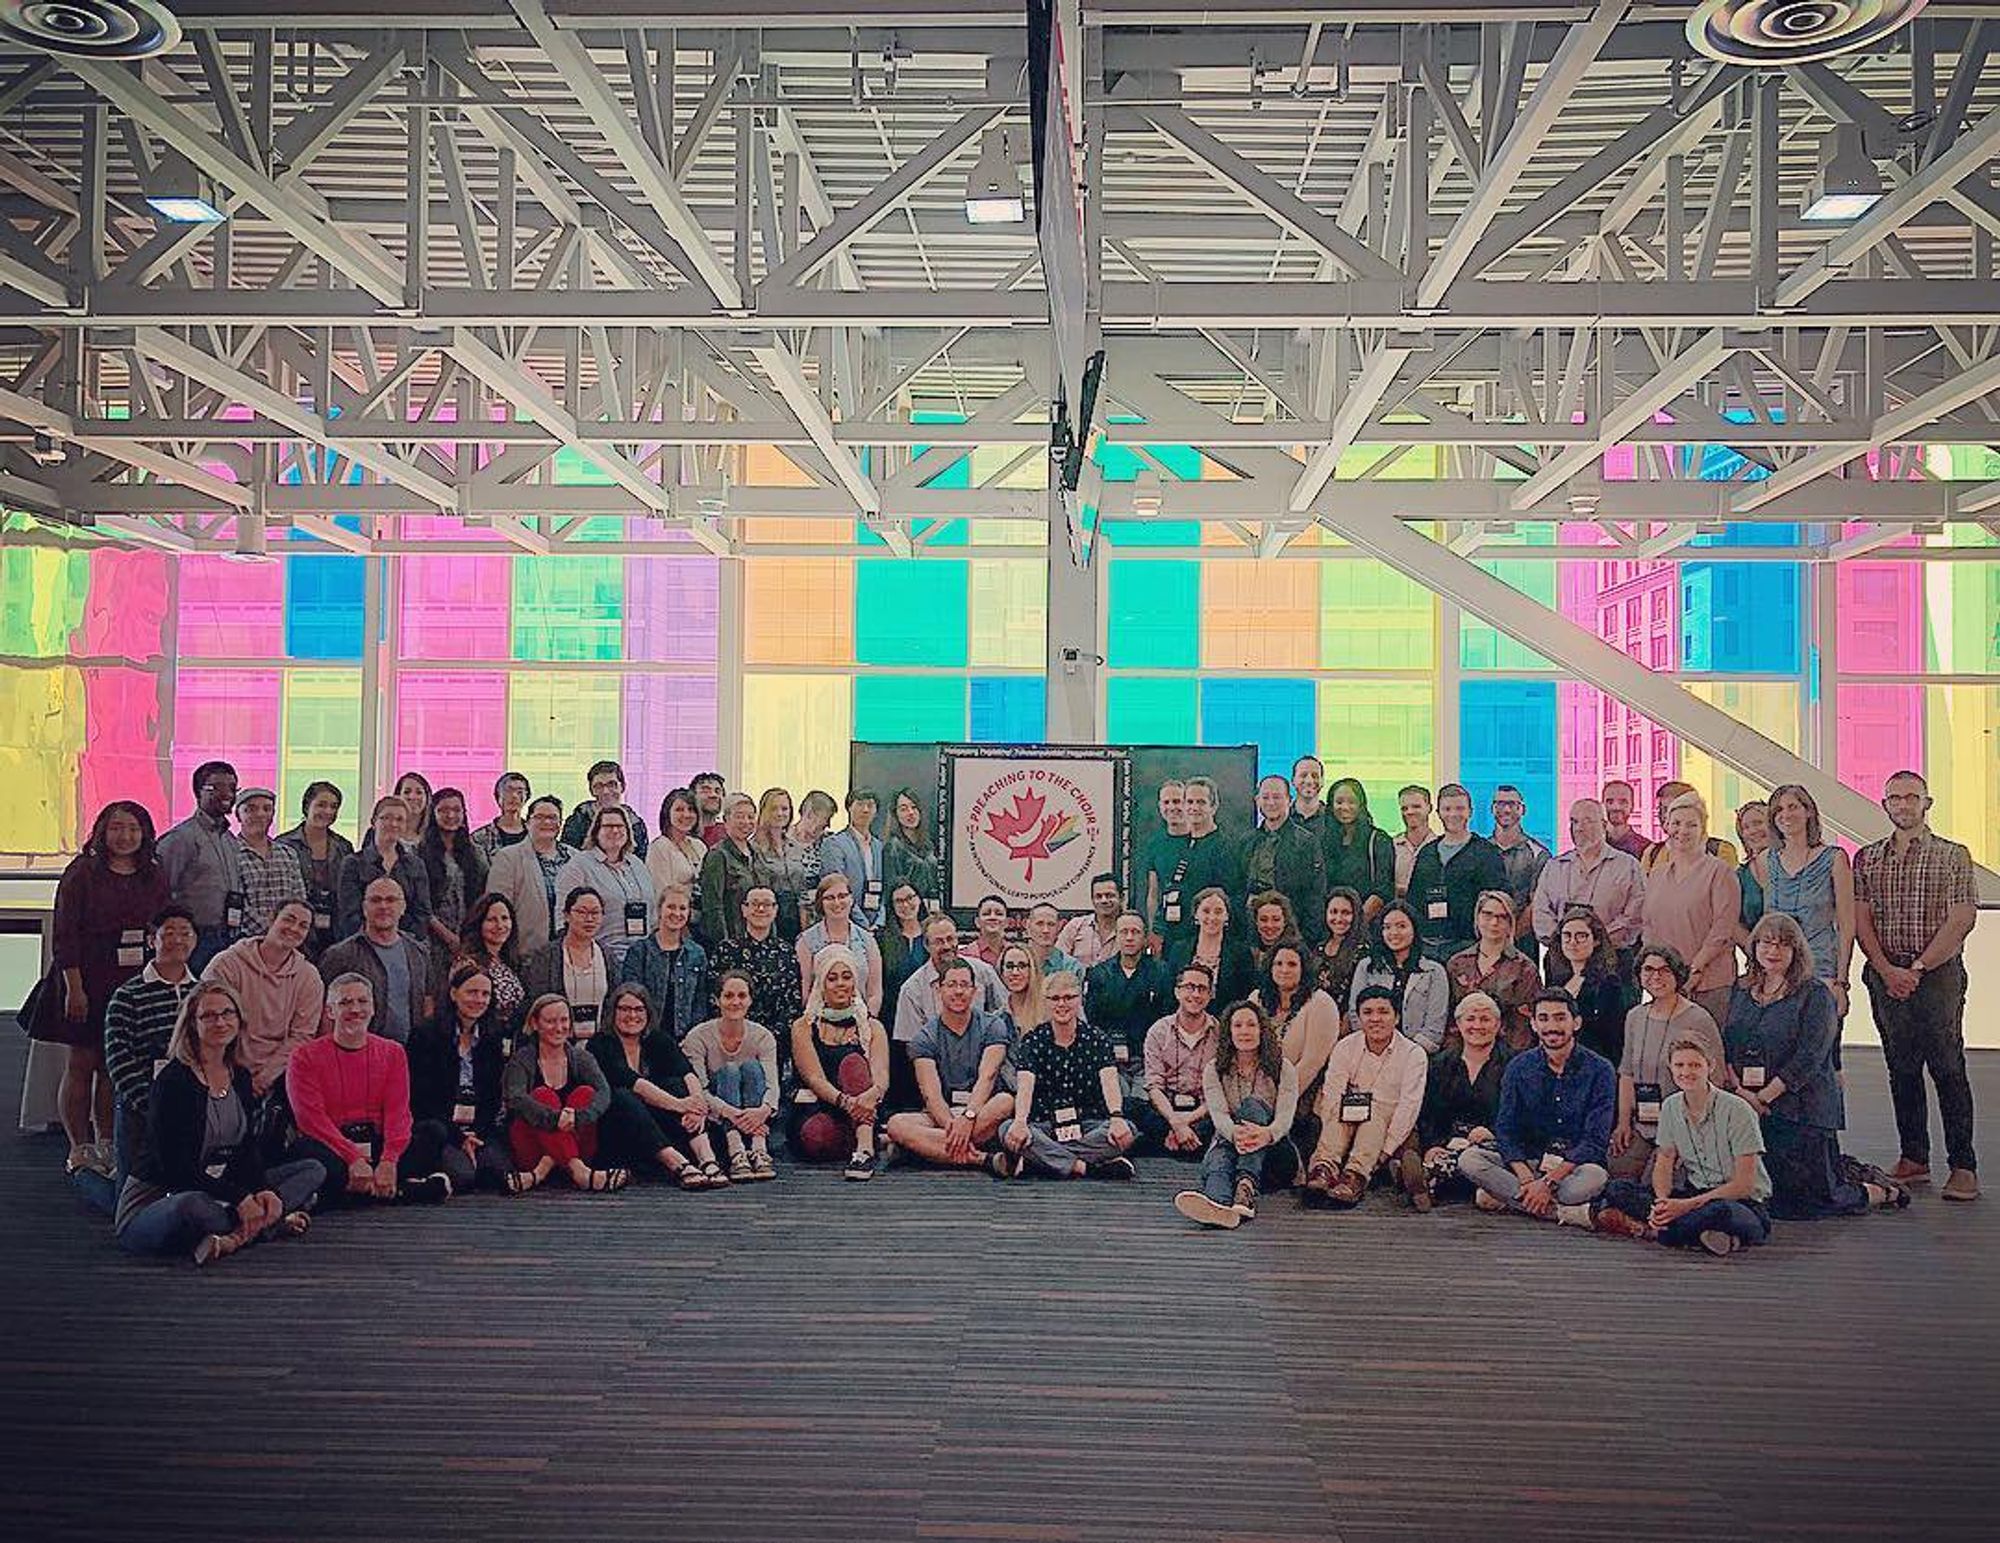 Participants at the 2018 Preaching to the Choir International LGBTQ Psychology Conference sponsored by LGBTQ Psychology Canada. 